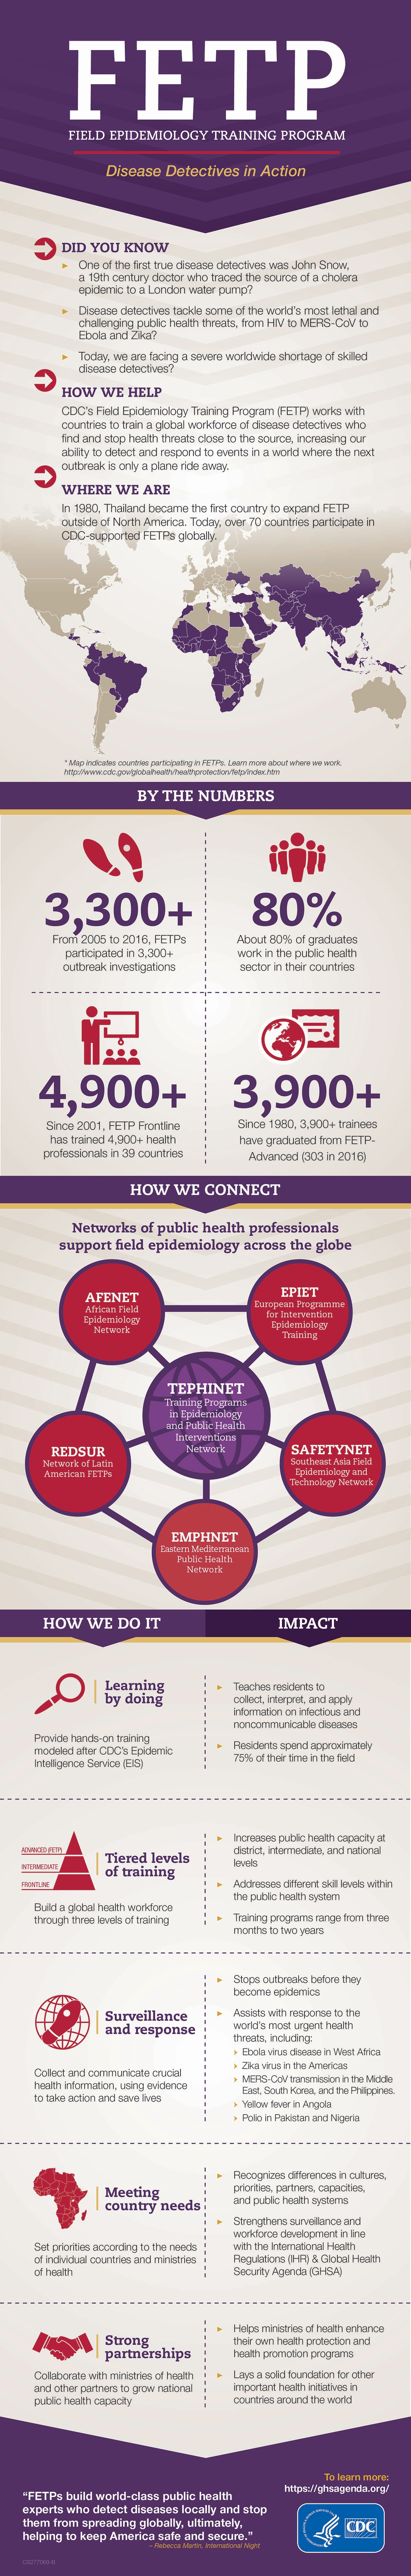 Infographic: FETP - Field Epidemiology Training Program - Disease Detectives in Action